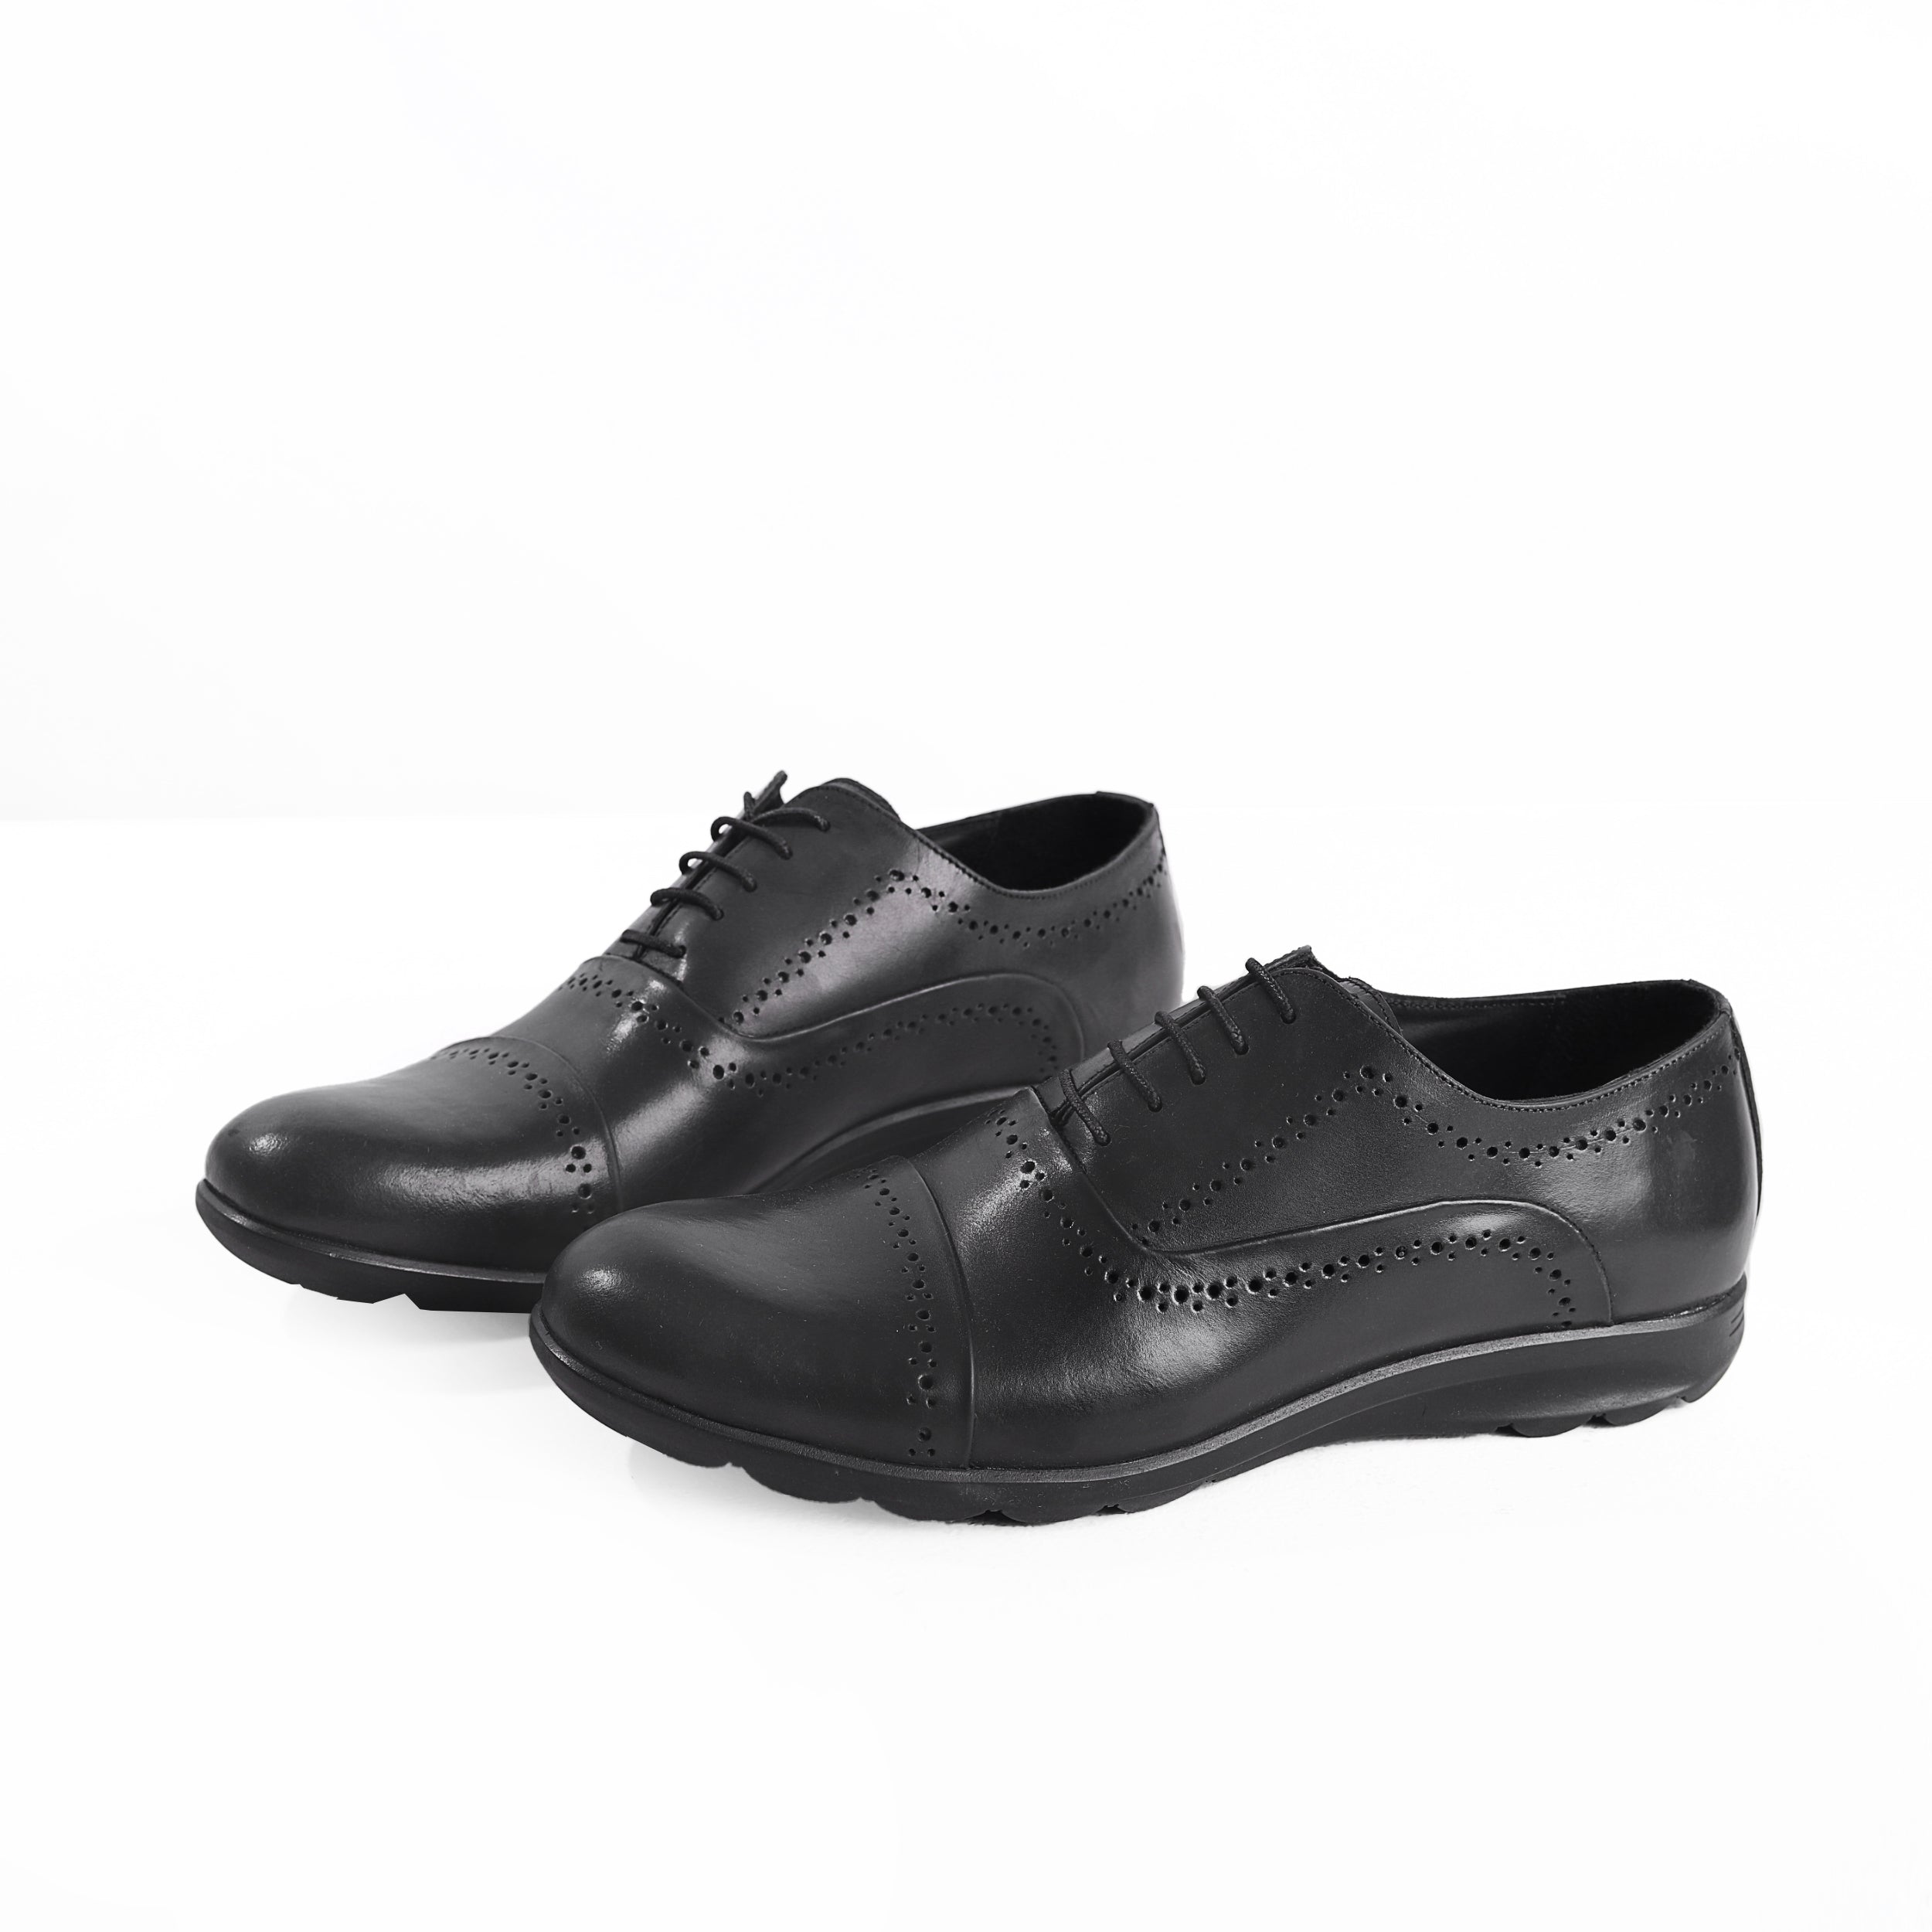 Heritage Black Classic Shoes For Men